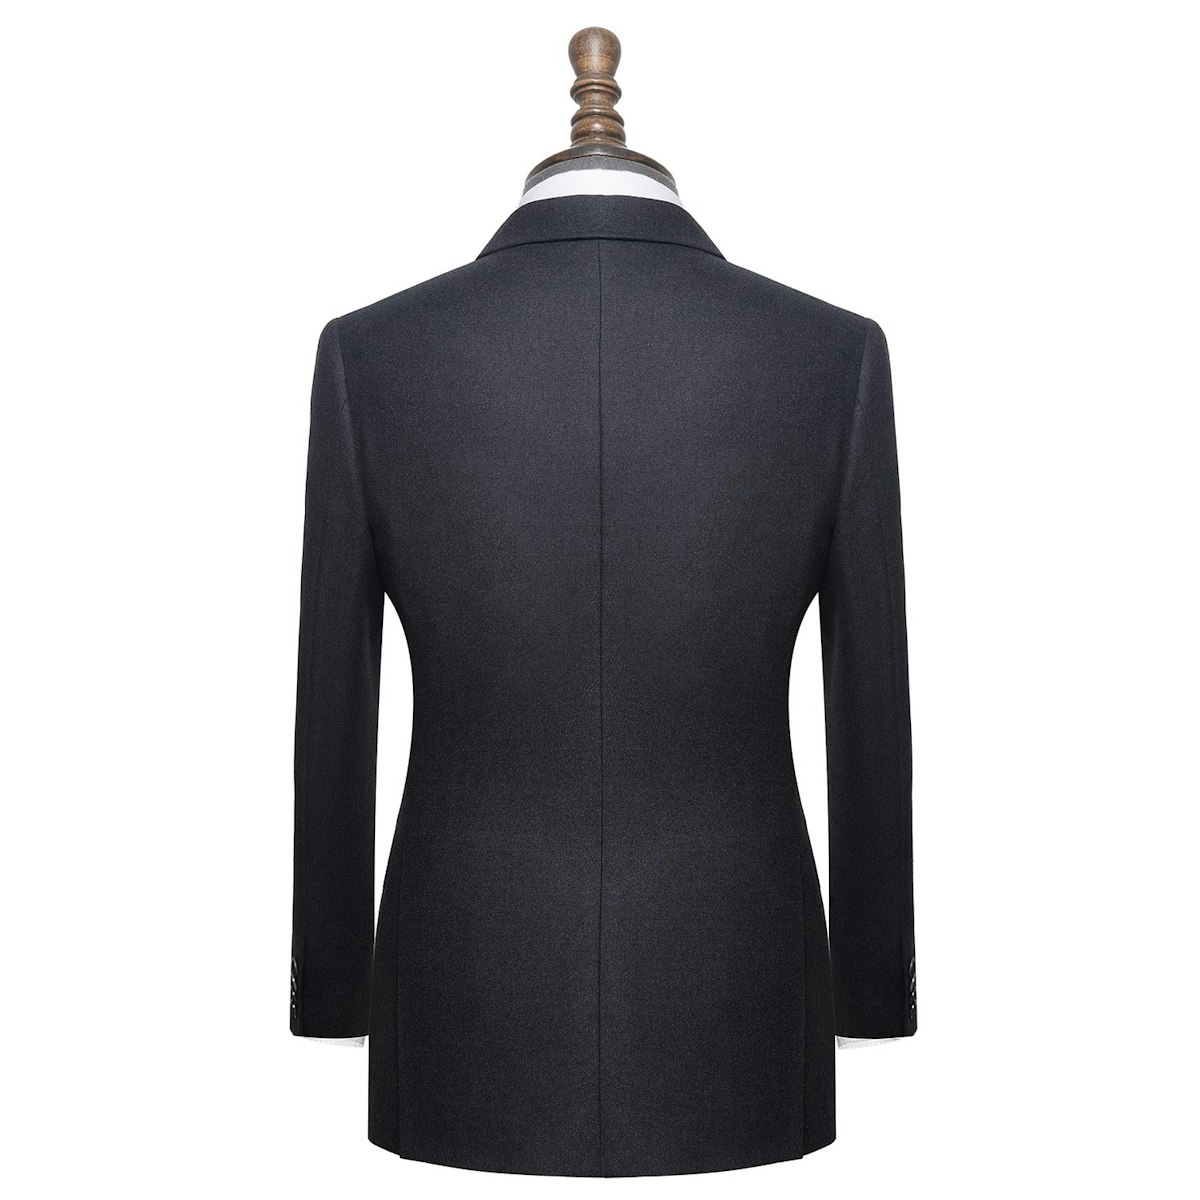 InStitchu Collection The Warminster mens suit